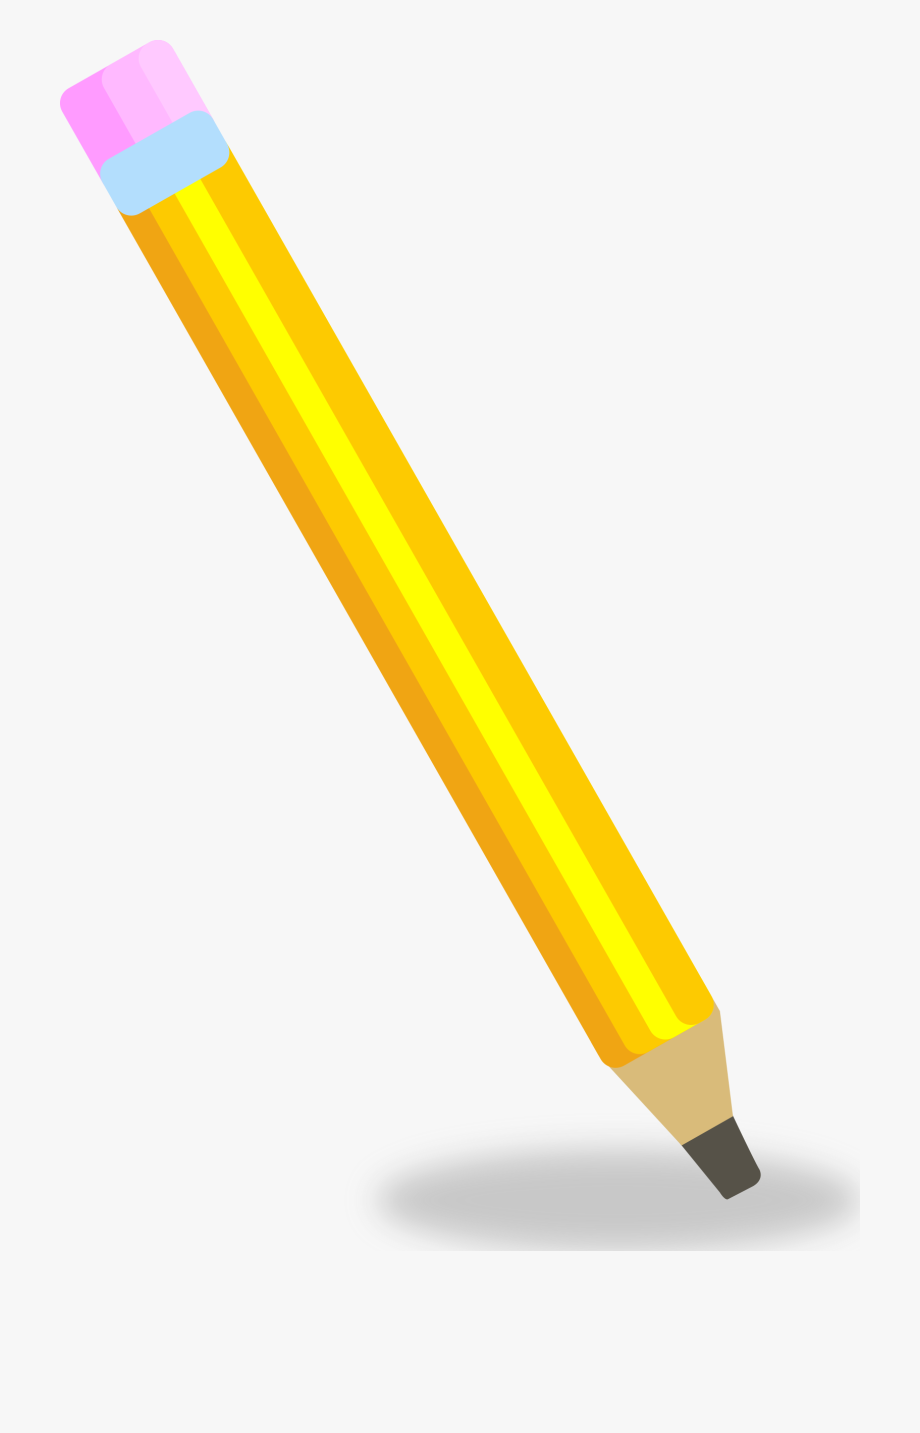 pencil animation free download